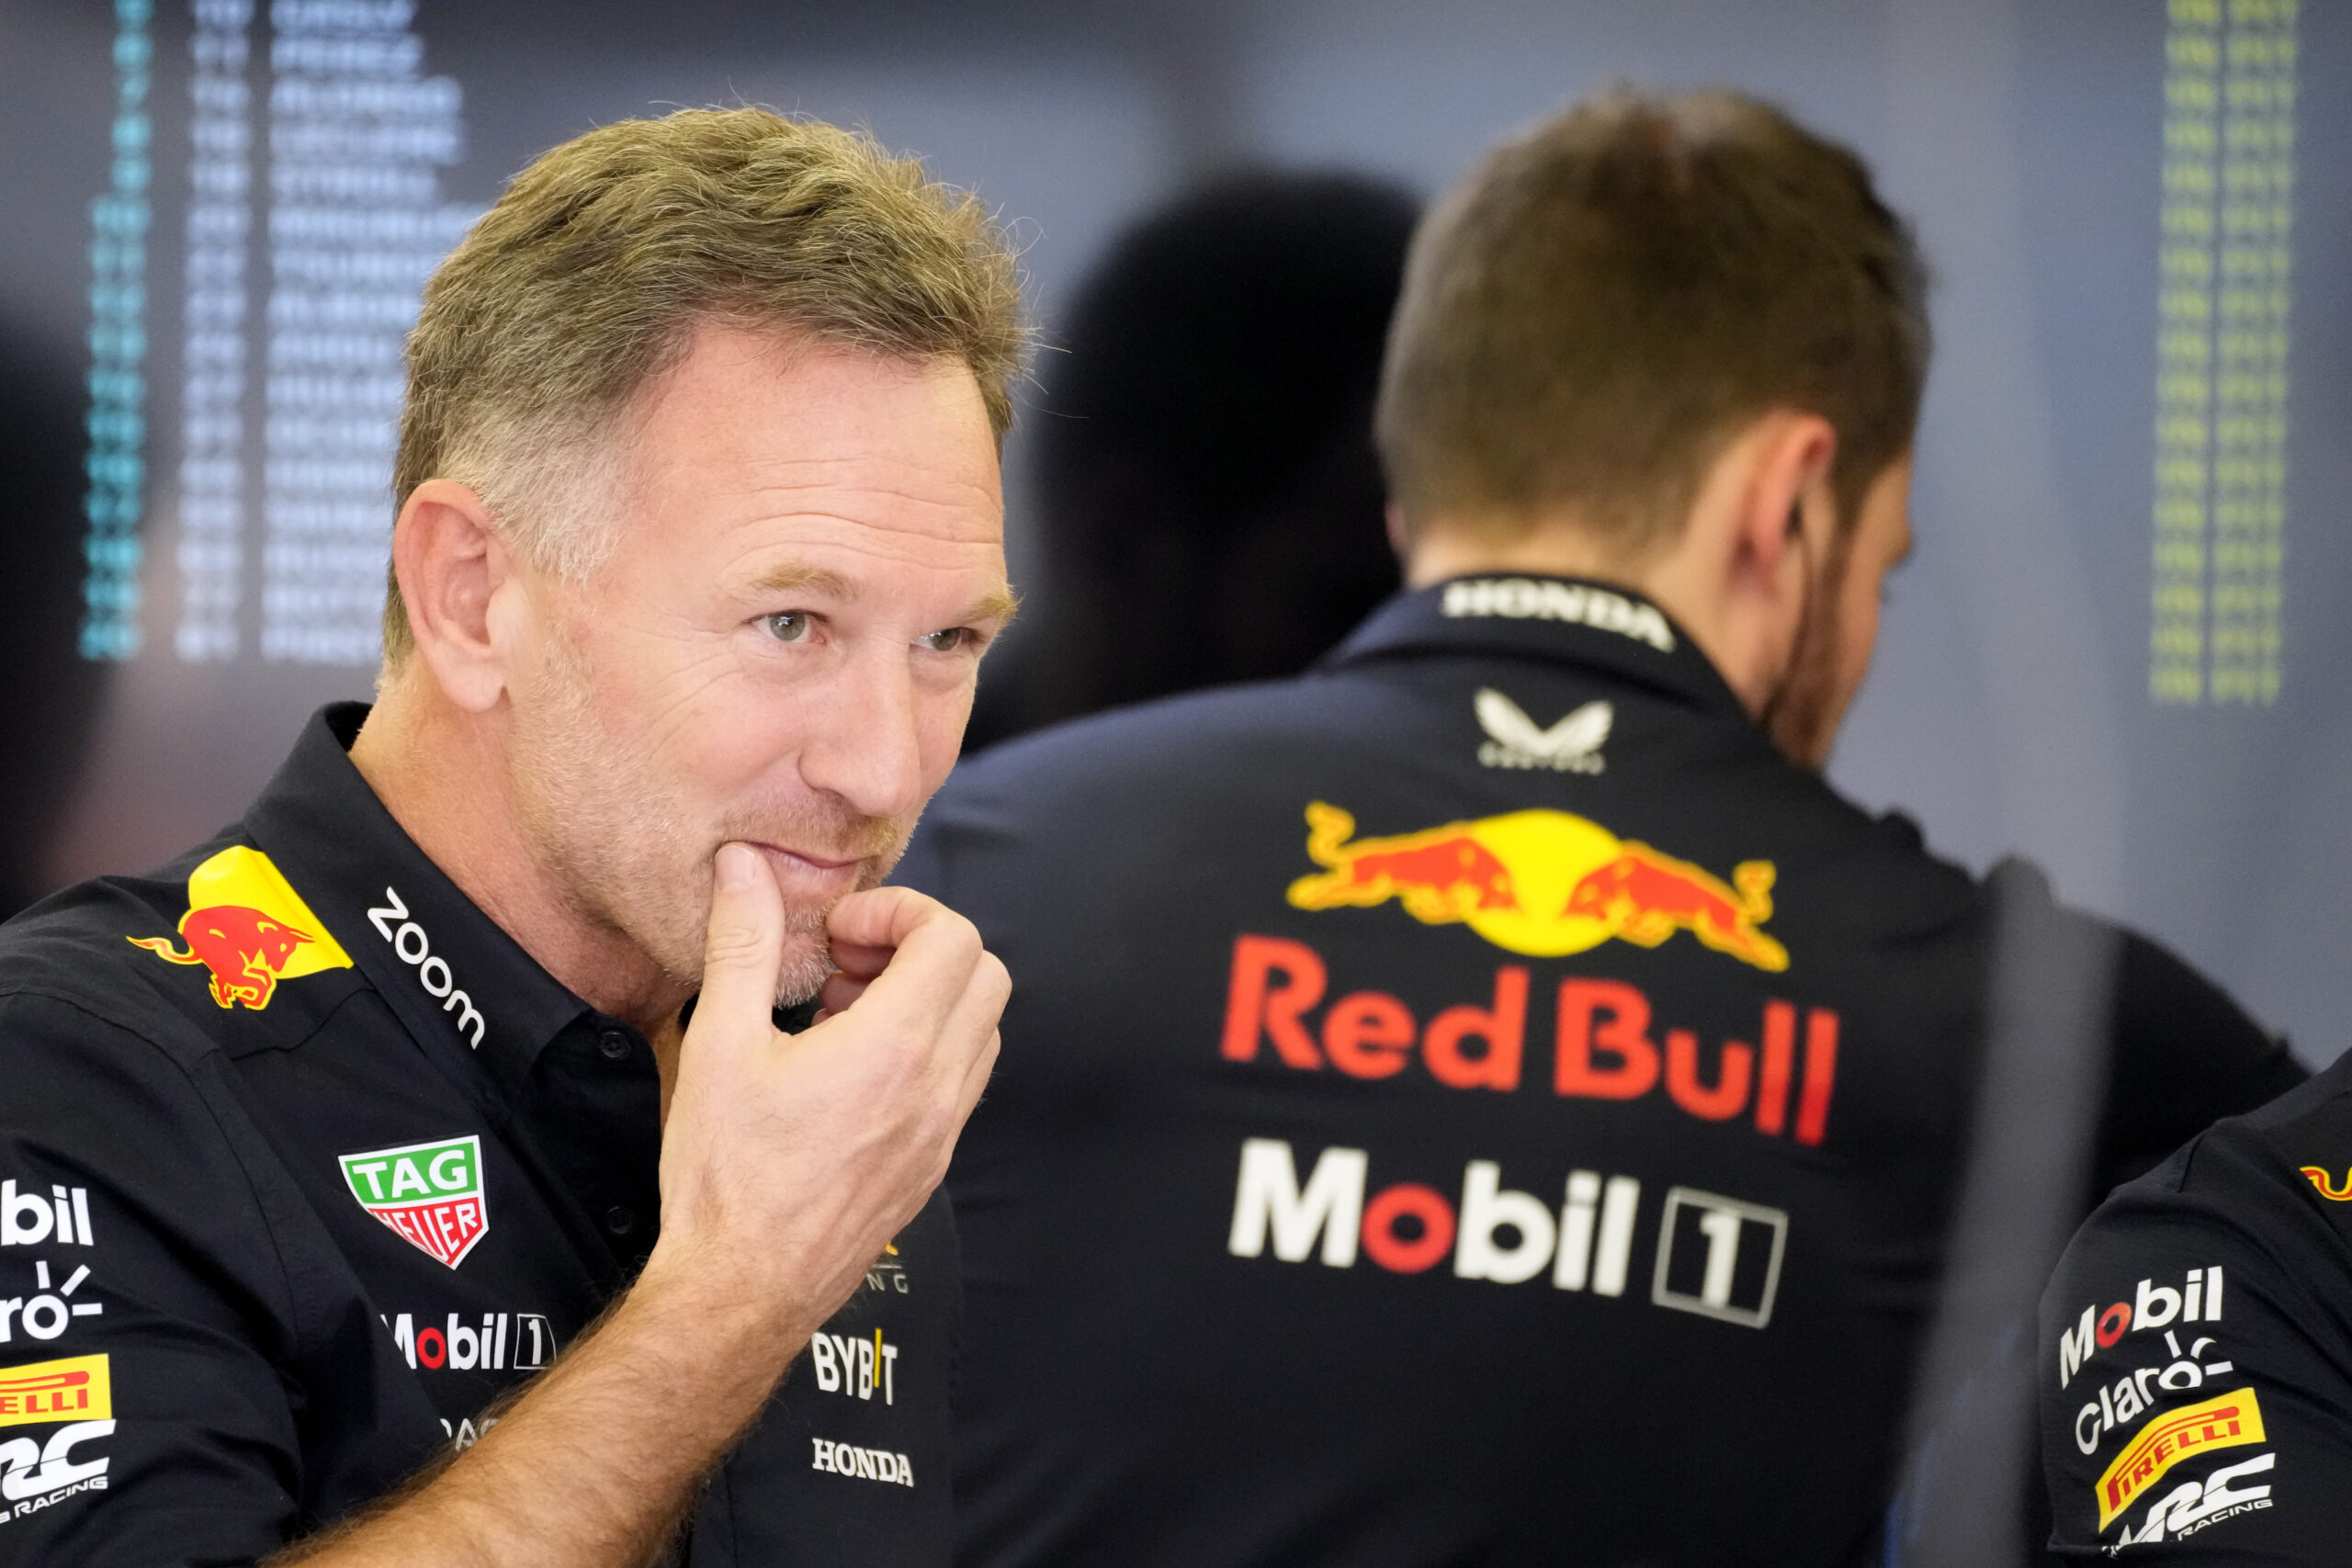 christian-horner-is-acquitted-of-the-accusations-against-him-and-will-continue-to-lead-red-bull